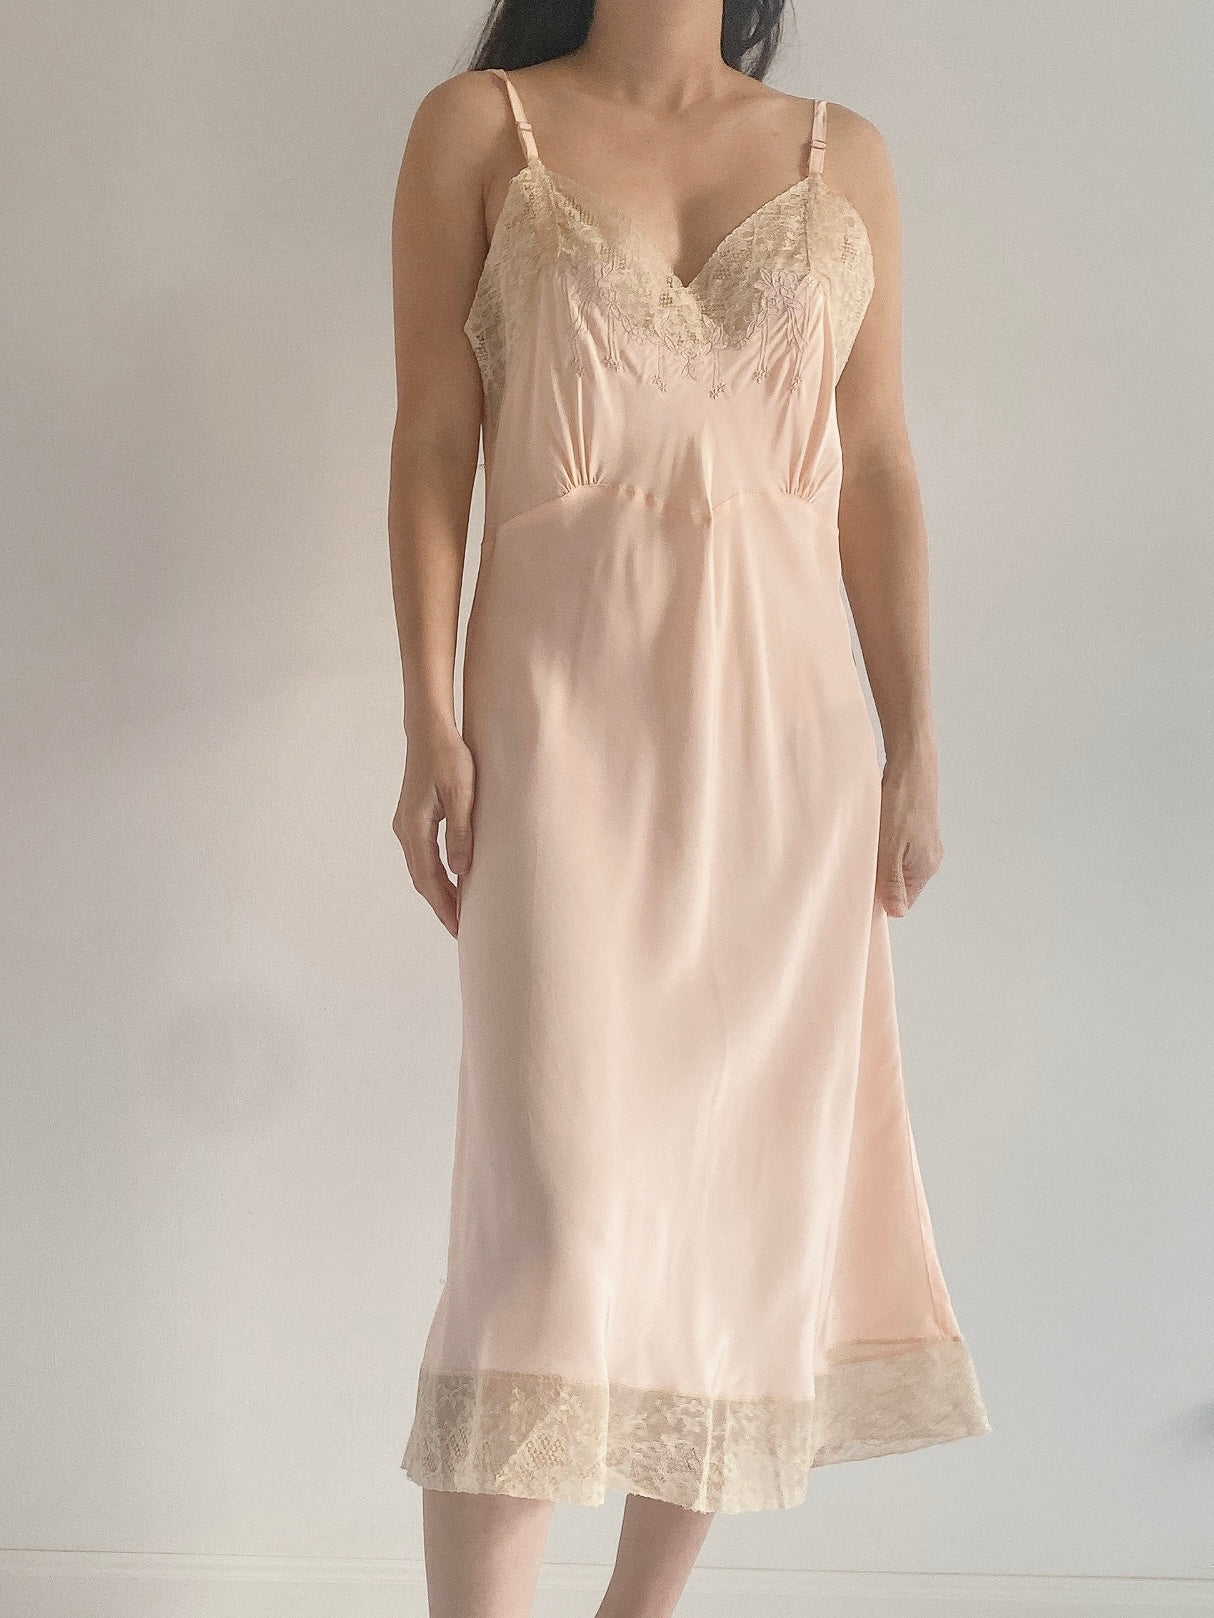 1930s Dusty Pink Rayon Satin Bias Slip Gown - S/M